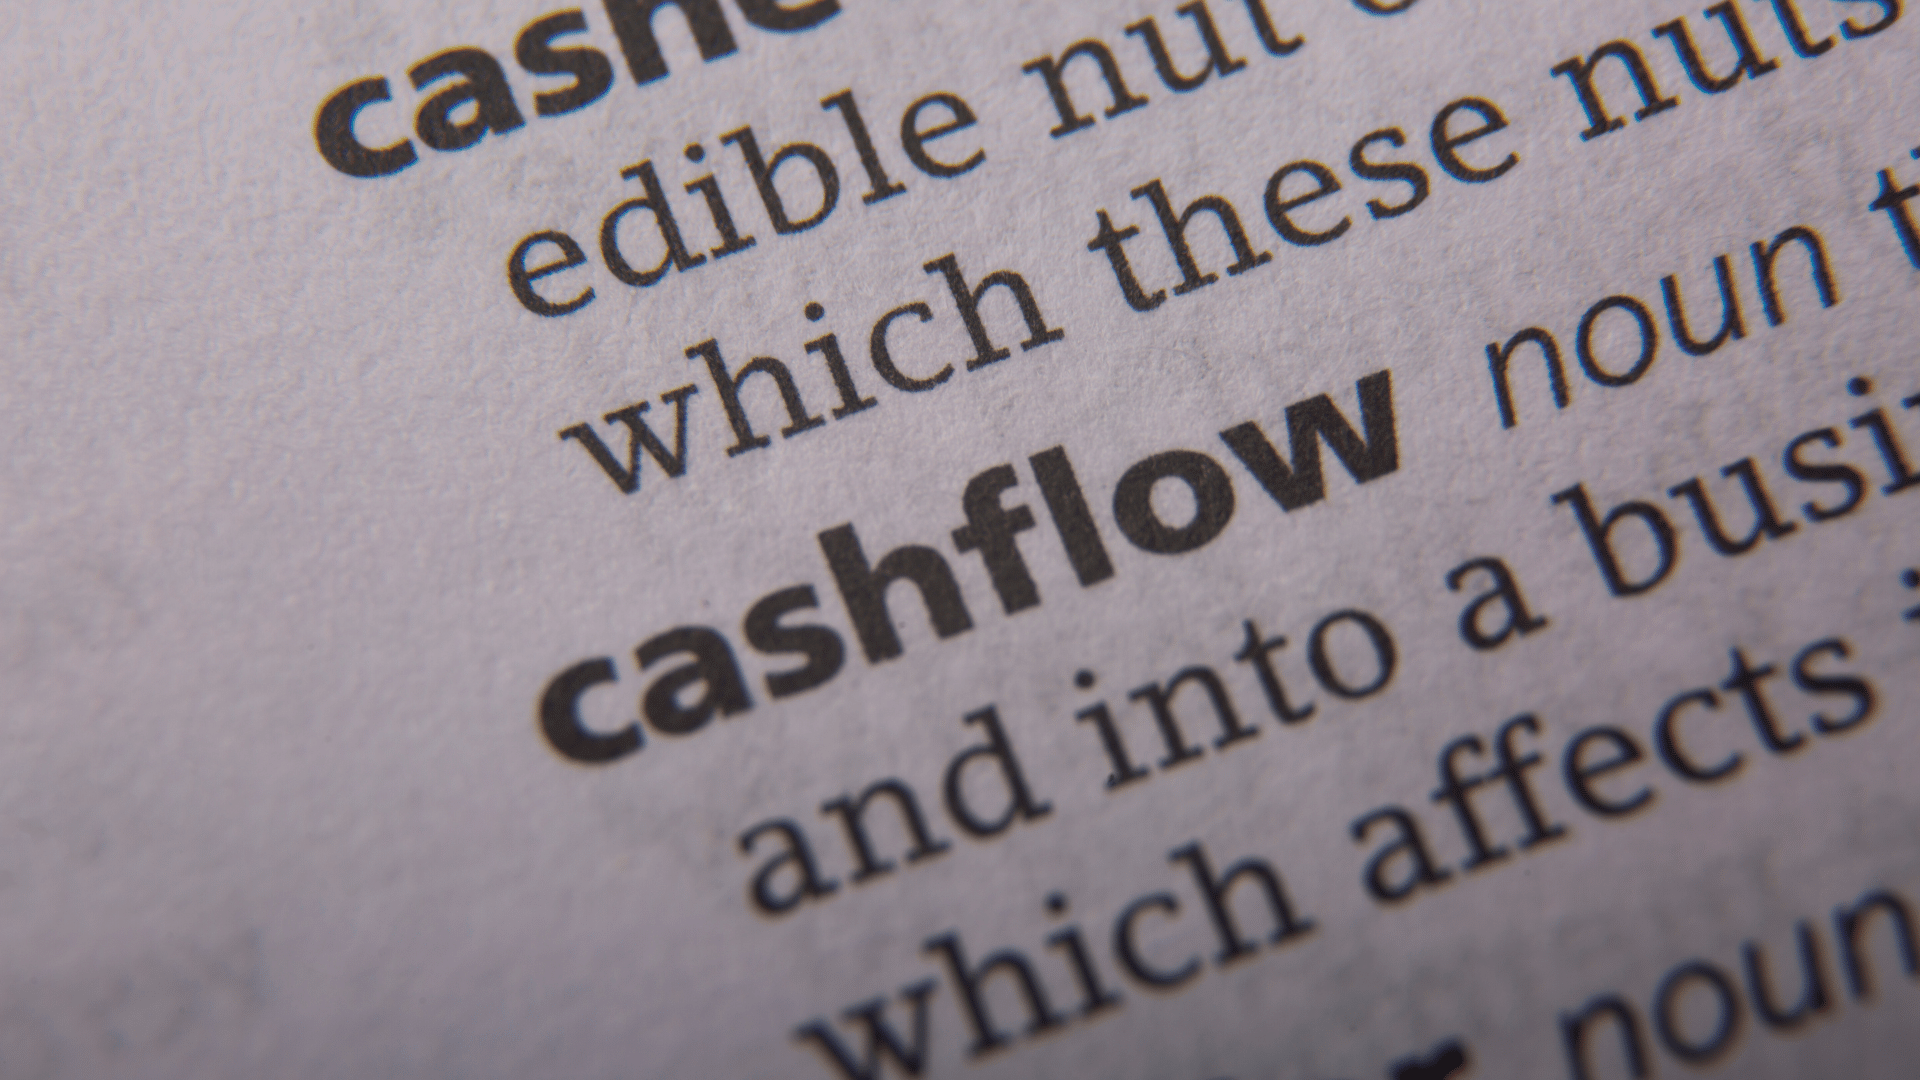 An image of the word Cashflow as written in a dictionary